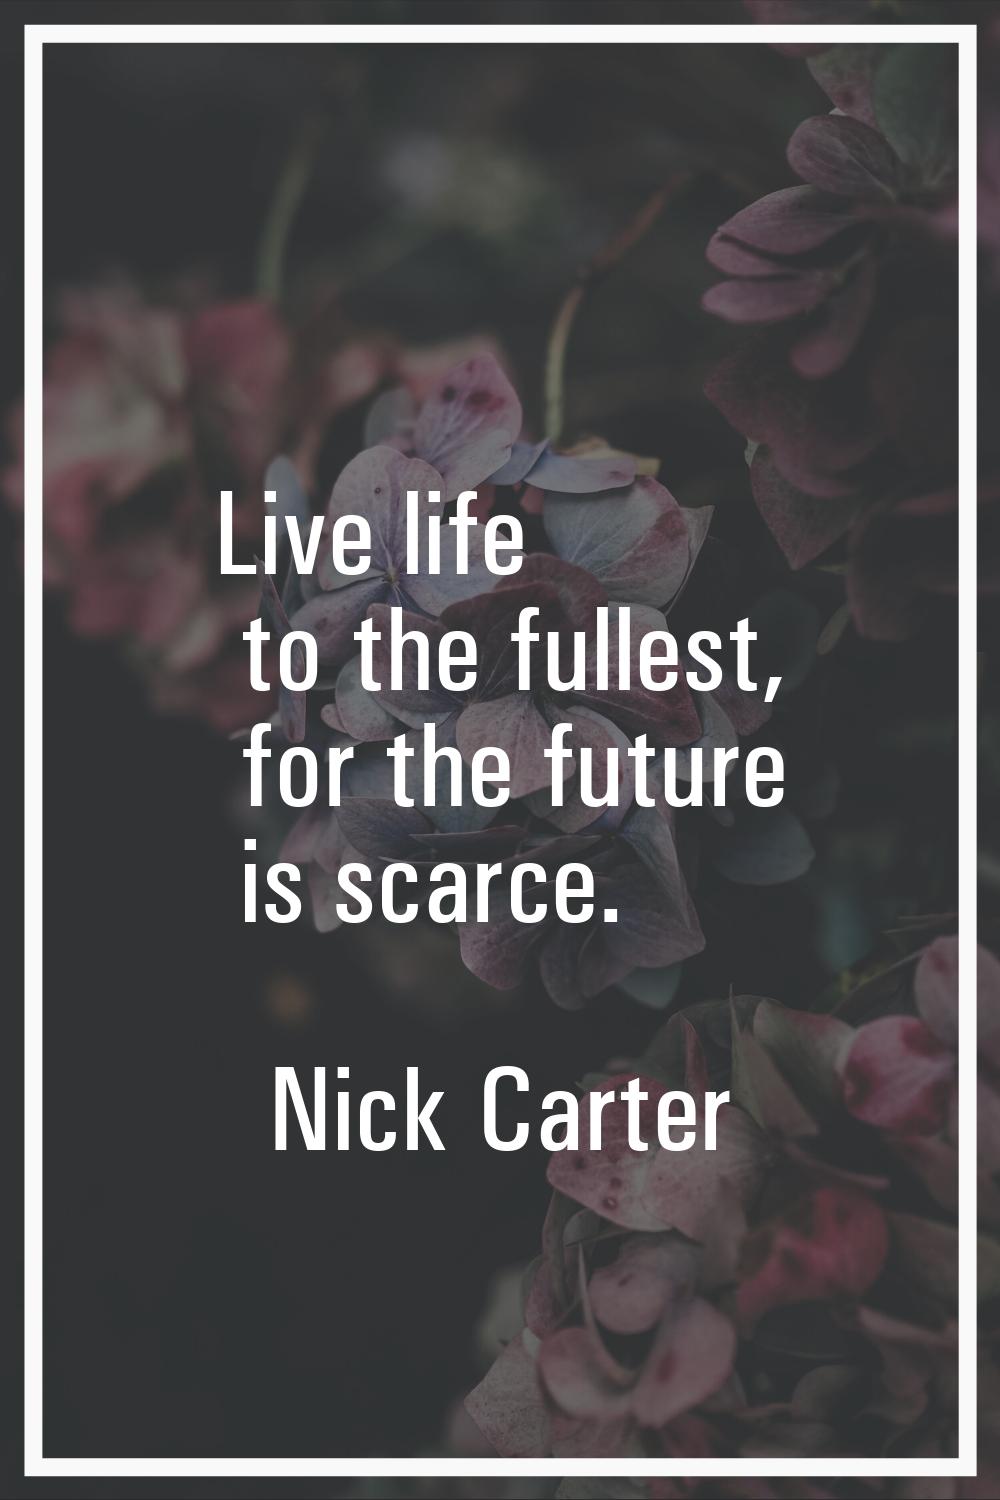 Live life to the fullest, for the future is scarce.